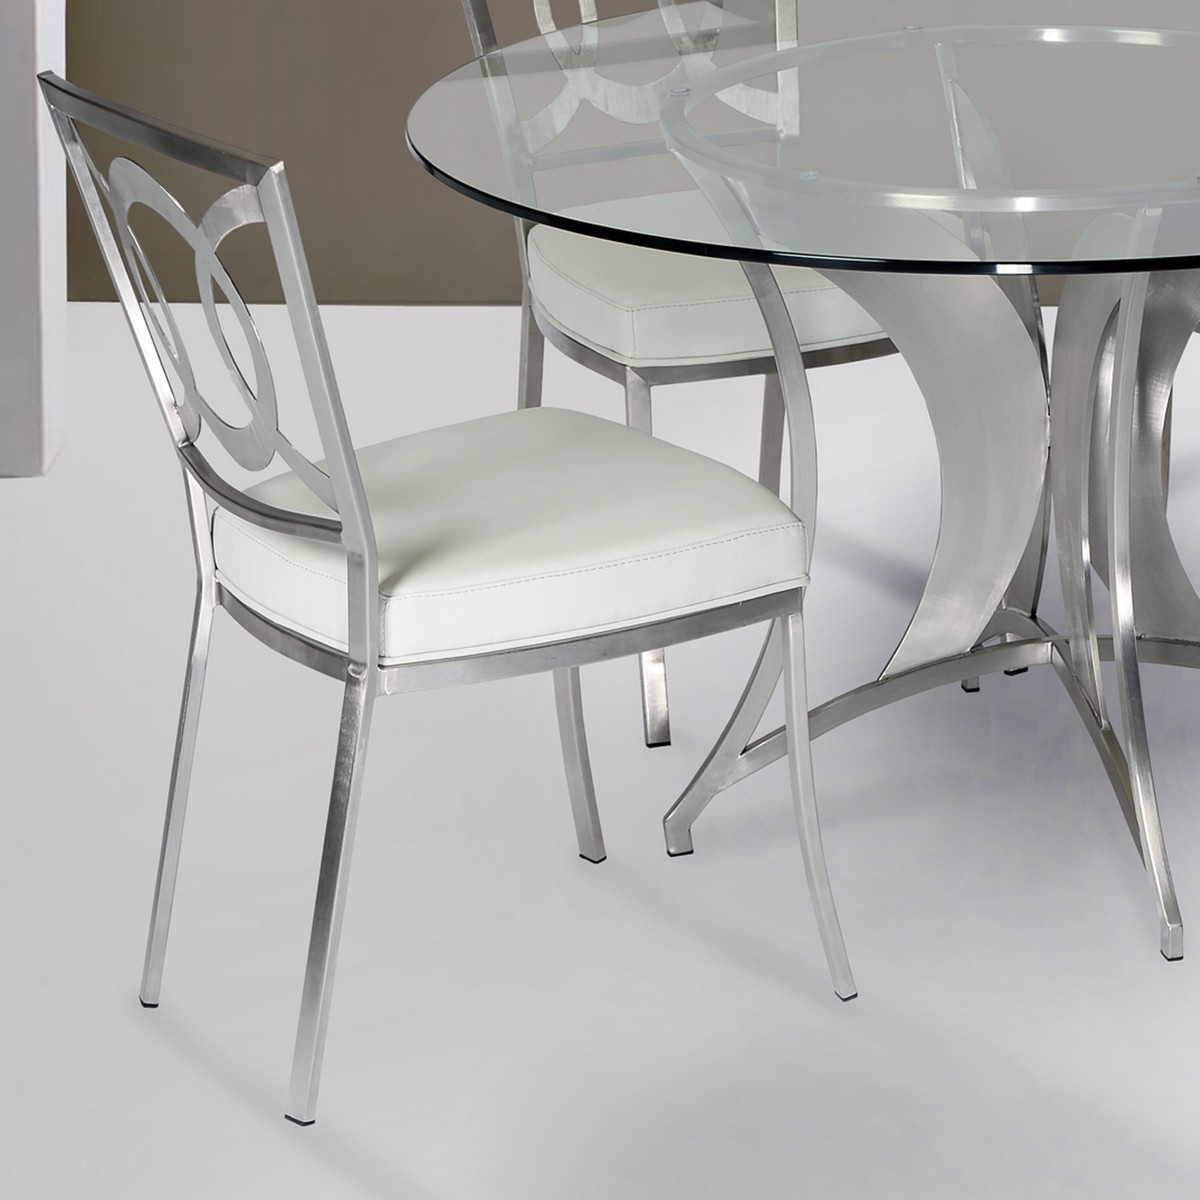 Armen Living Drake Modern Dining Chair In White and Stainless Steel